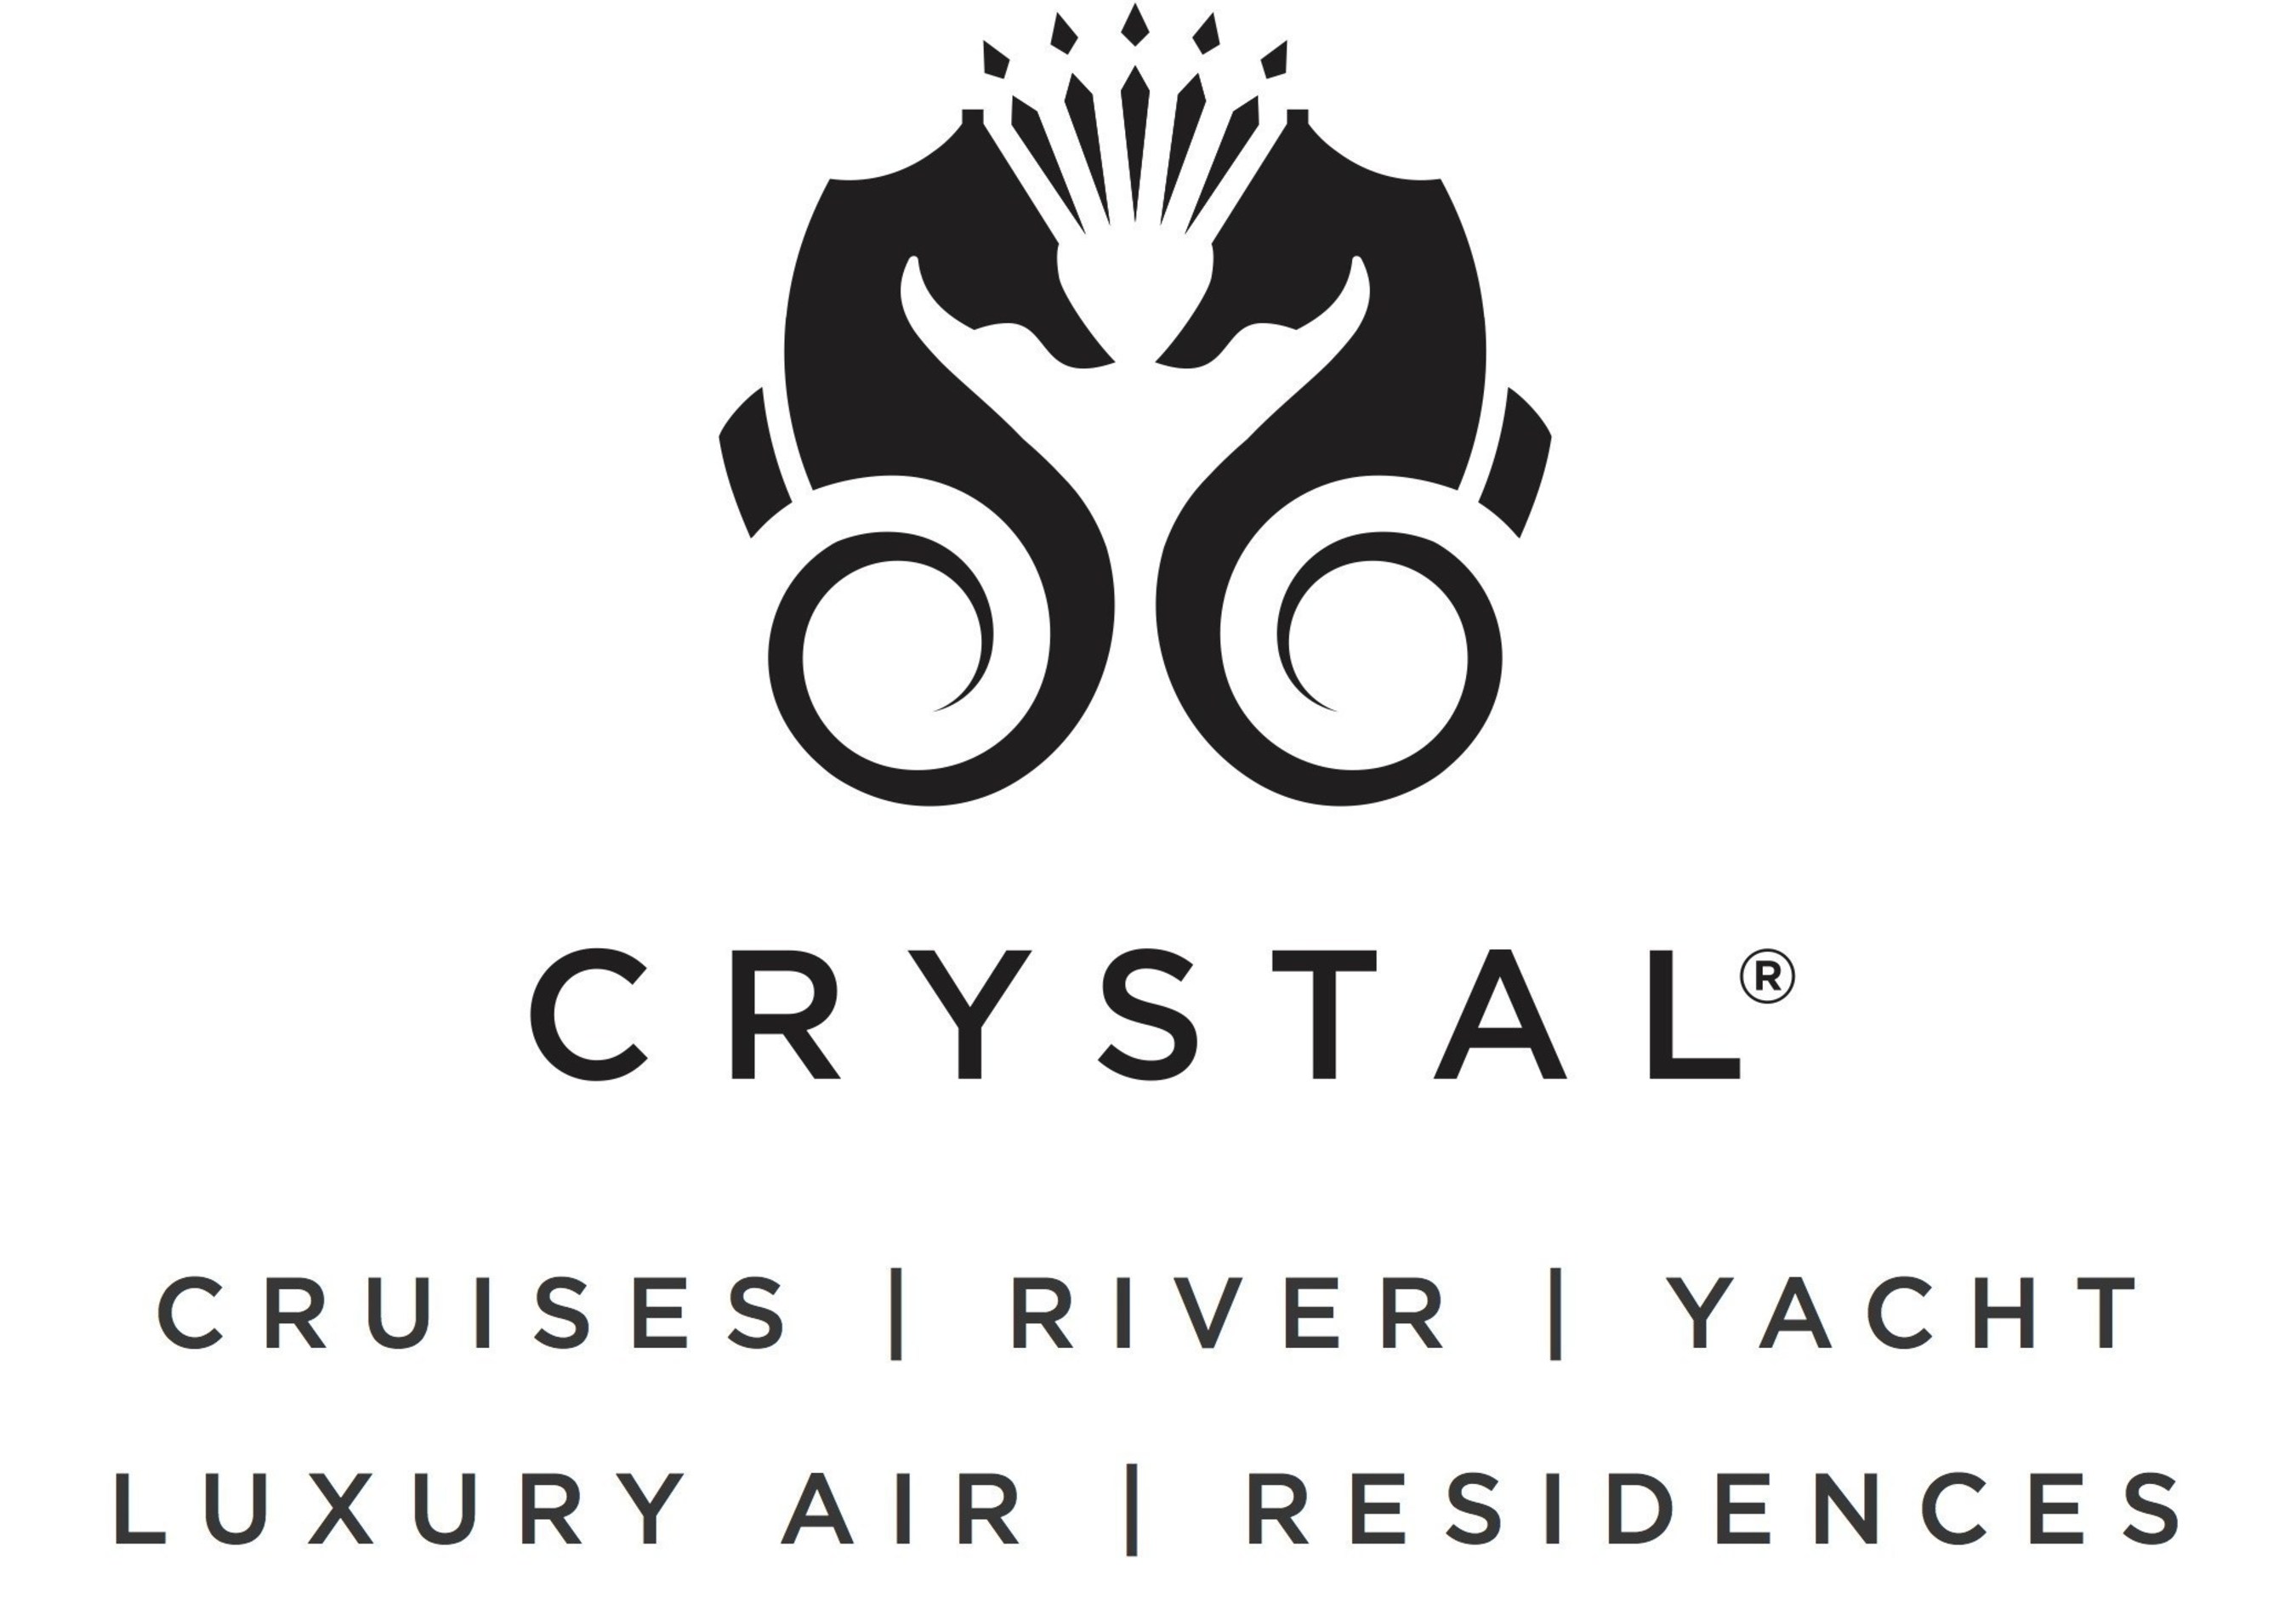 crystal cruises sign in